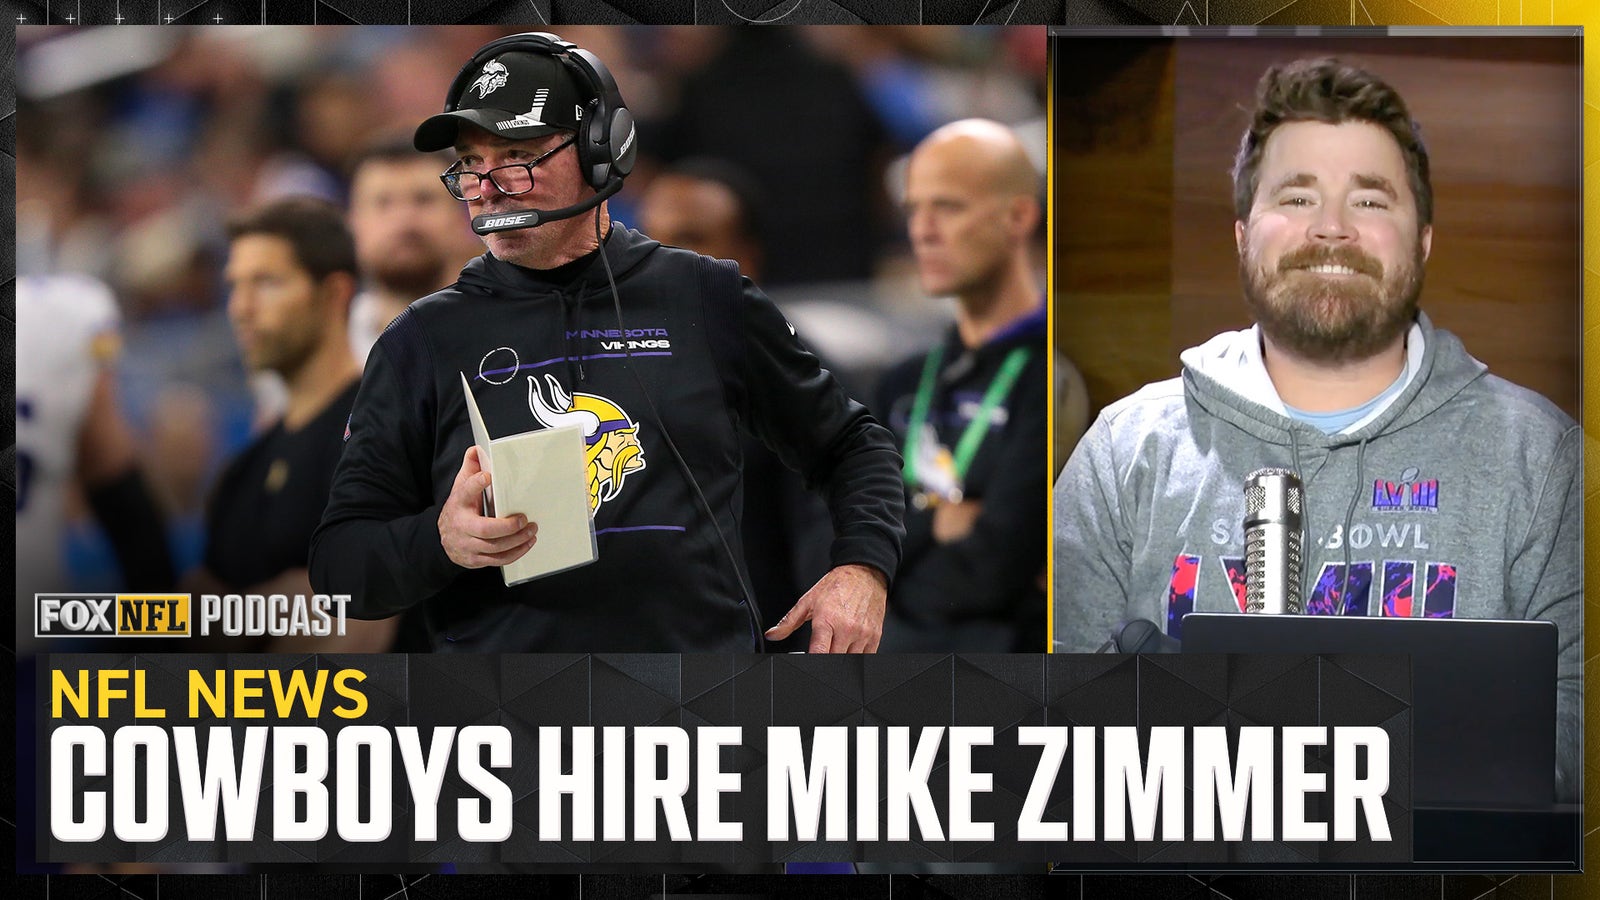 Mike Zimmer hired as Cowboys' defensive coordinator | NFL on FOX Pod